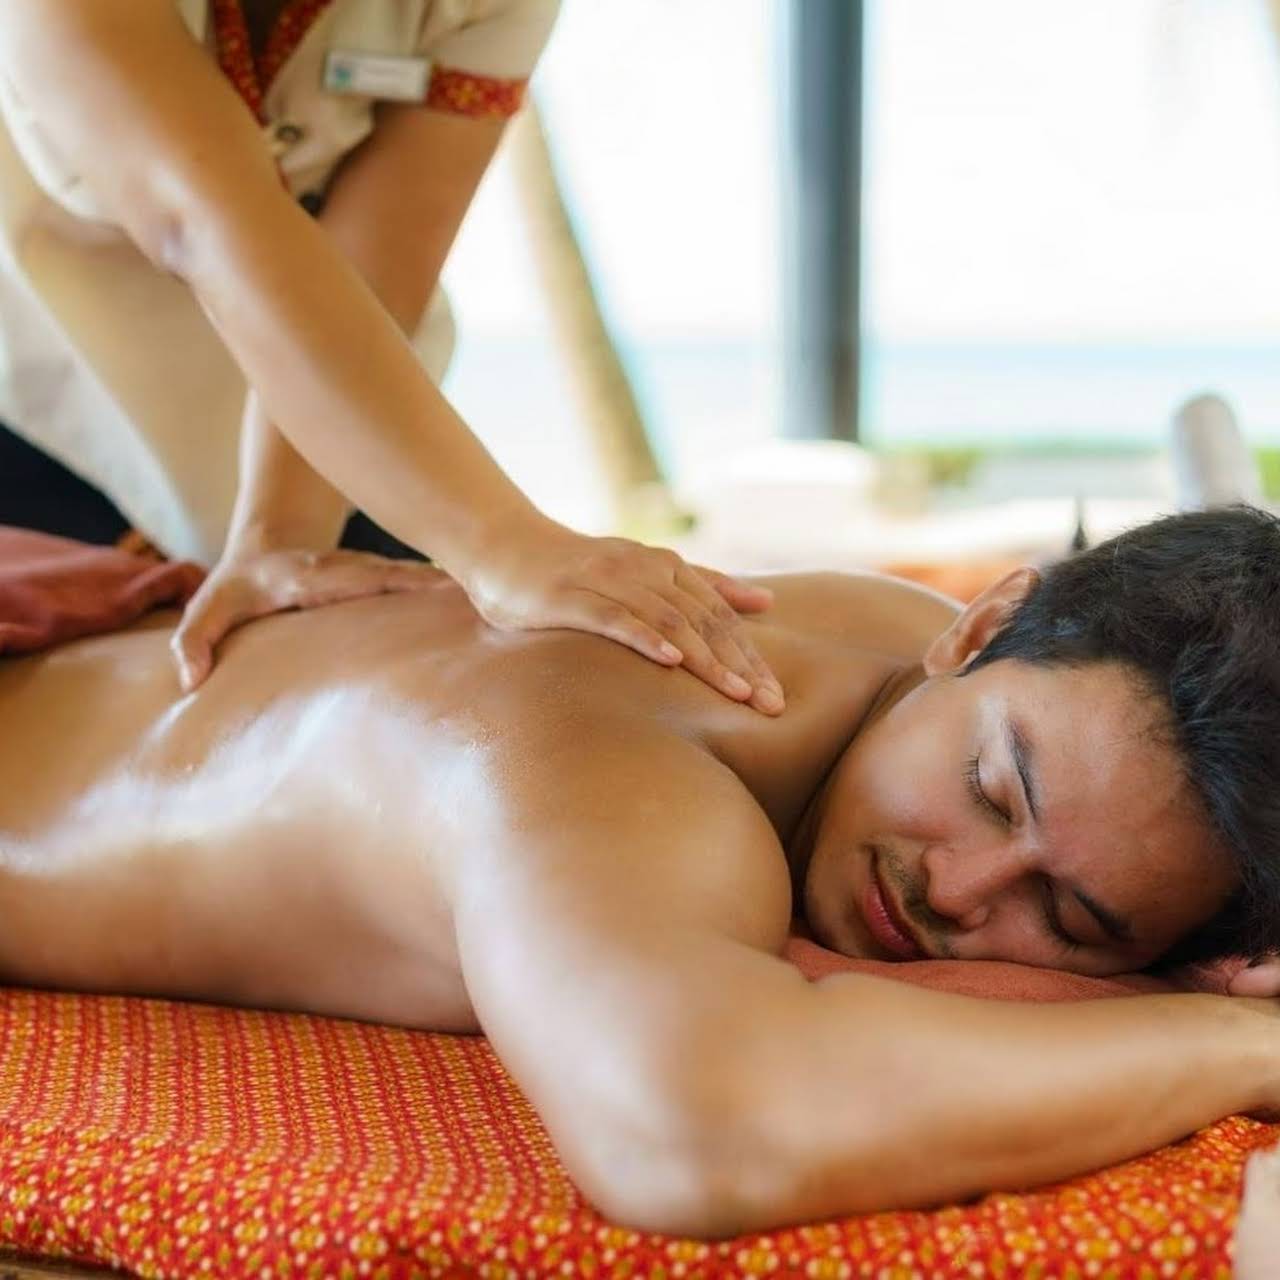 Body to body massage by girls Vaishali Nagar 8290035046,Jaipur,Services,Free Classifieds,Post Free Ads,77traders.com